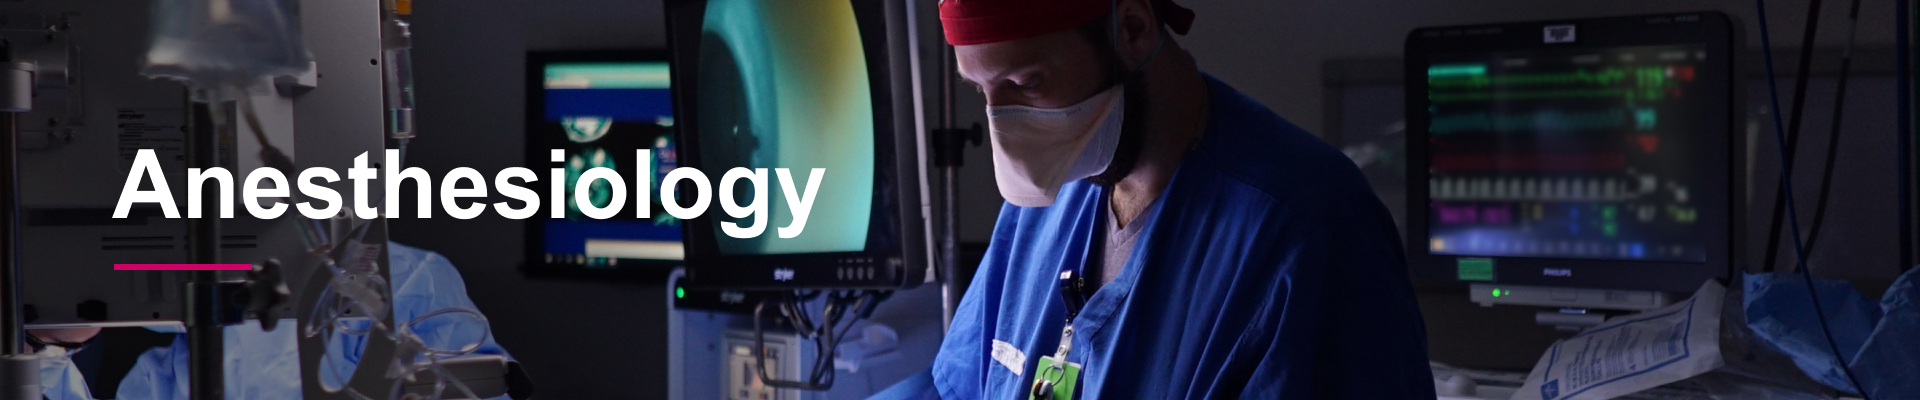 Meet the Obstetrical Anesthesiology Team